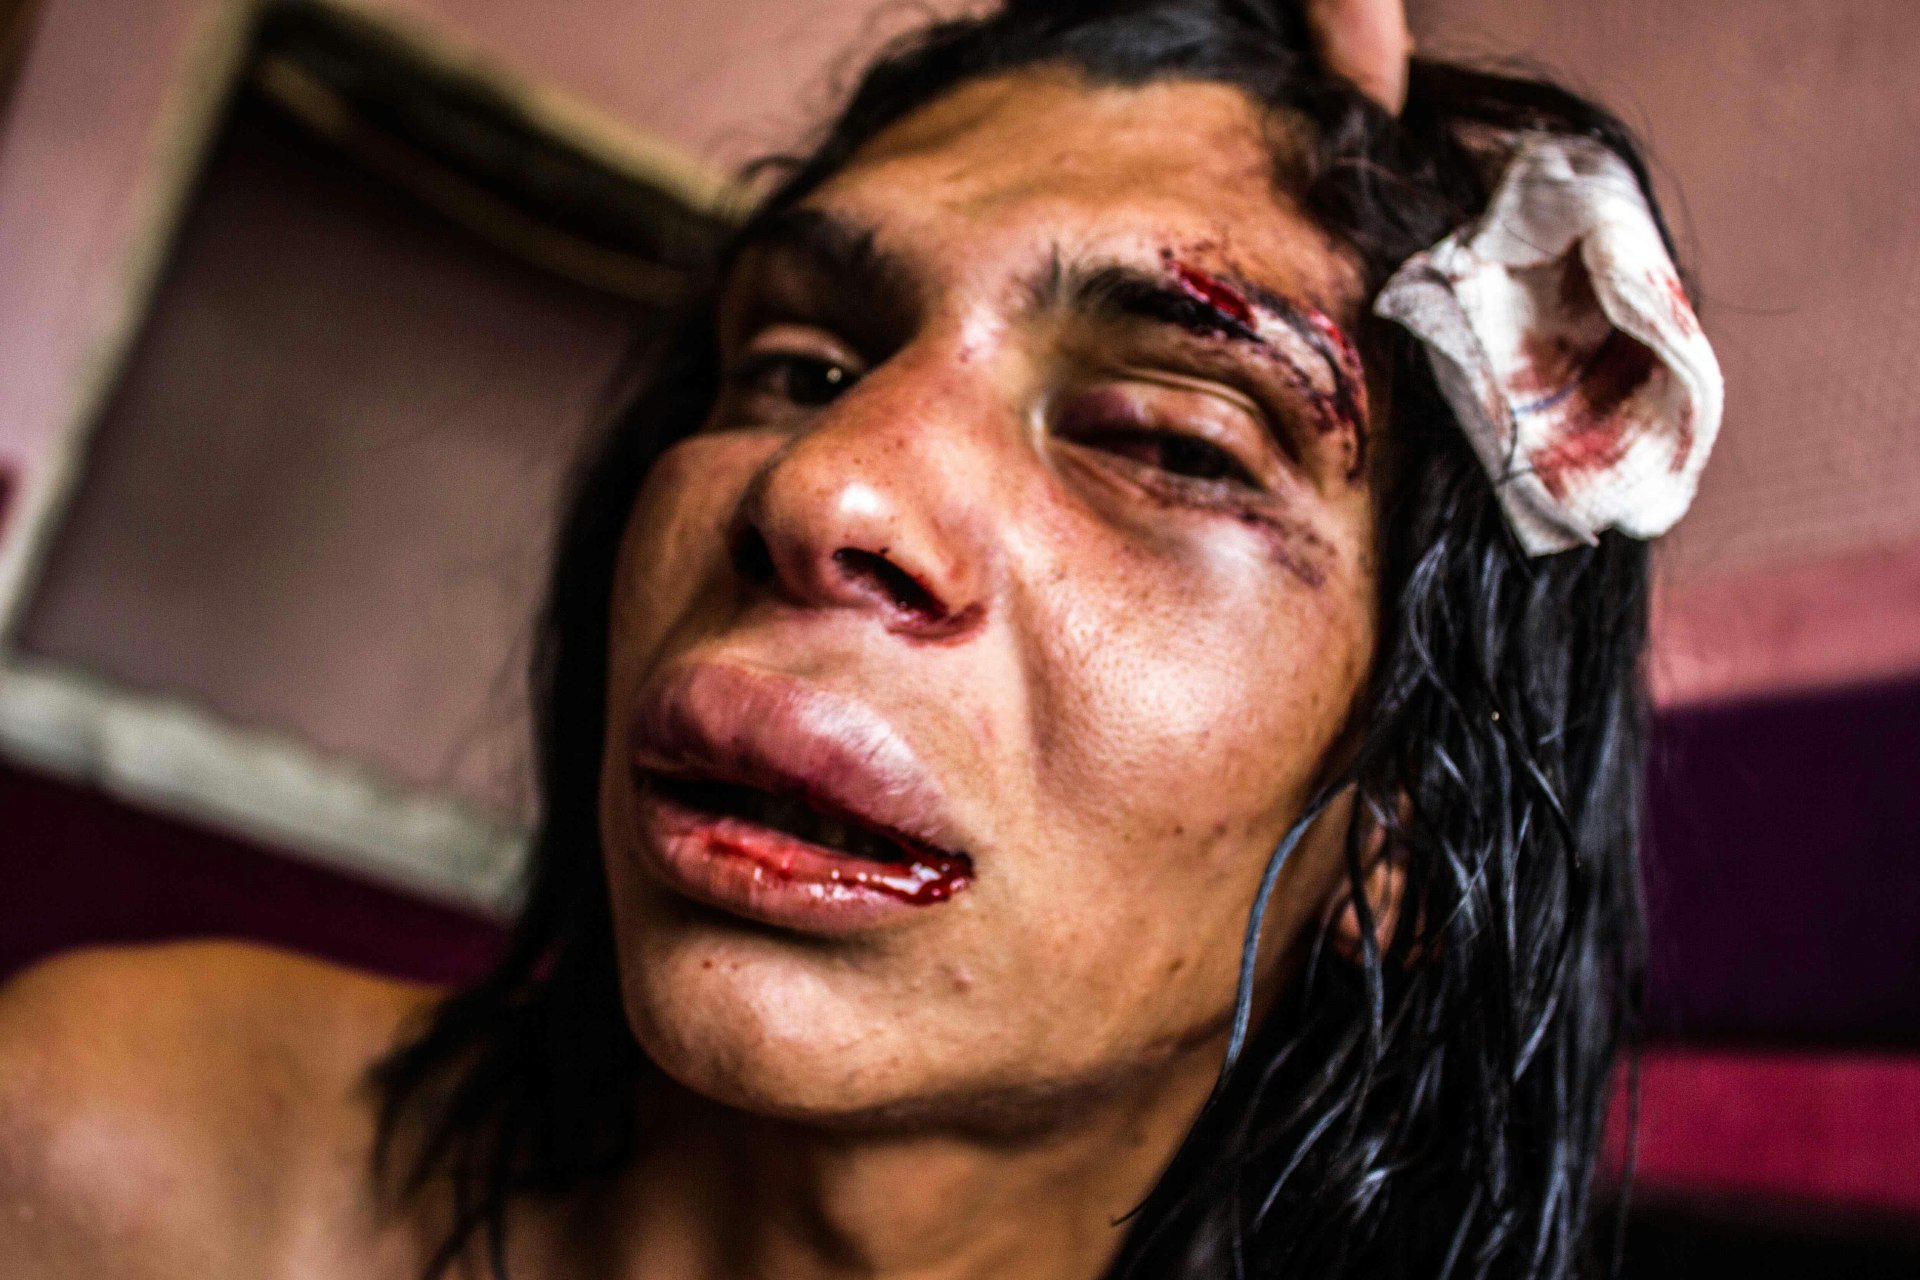 Documenting the violence facing Turkey's trans community